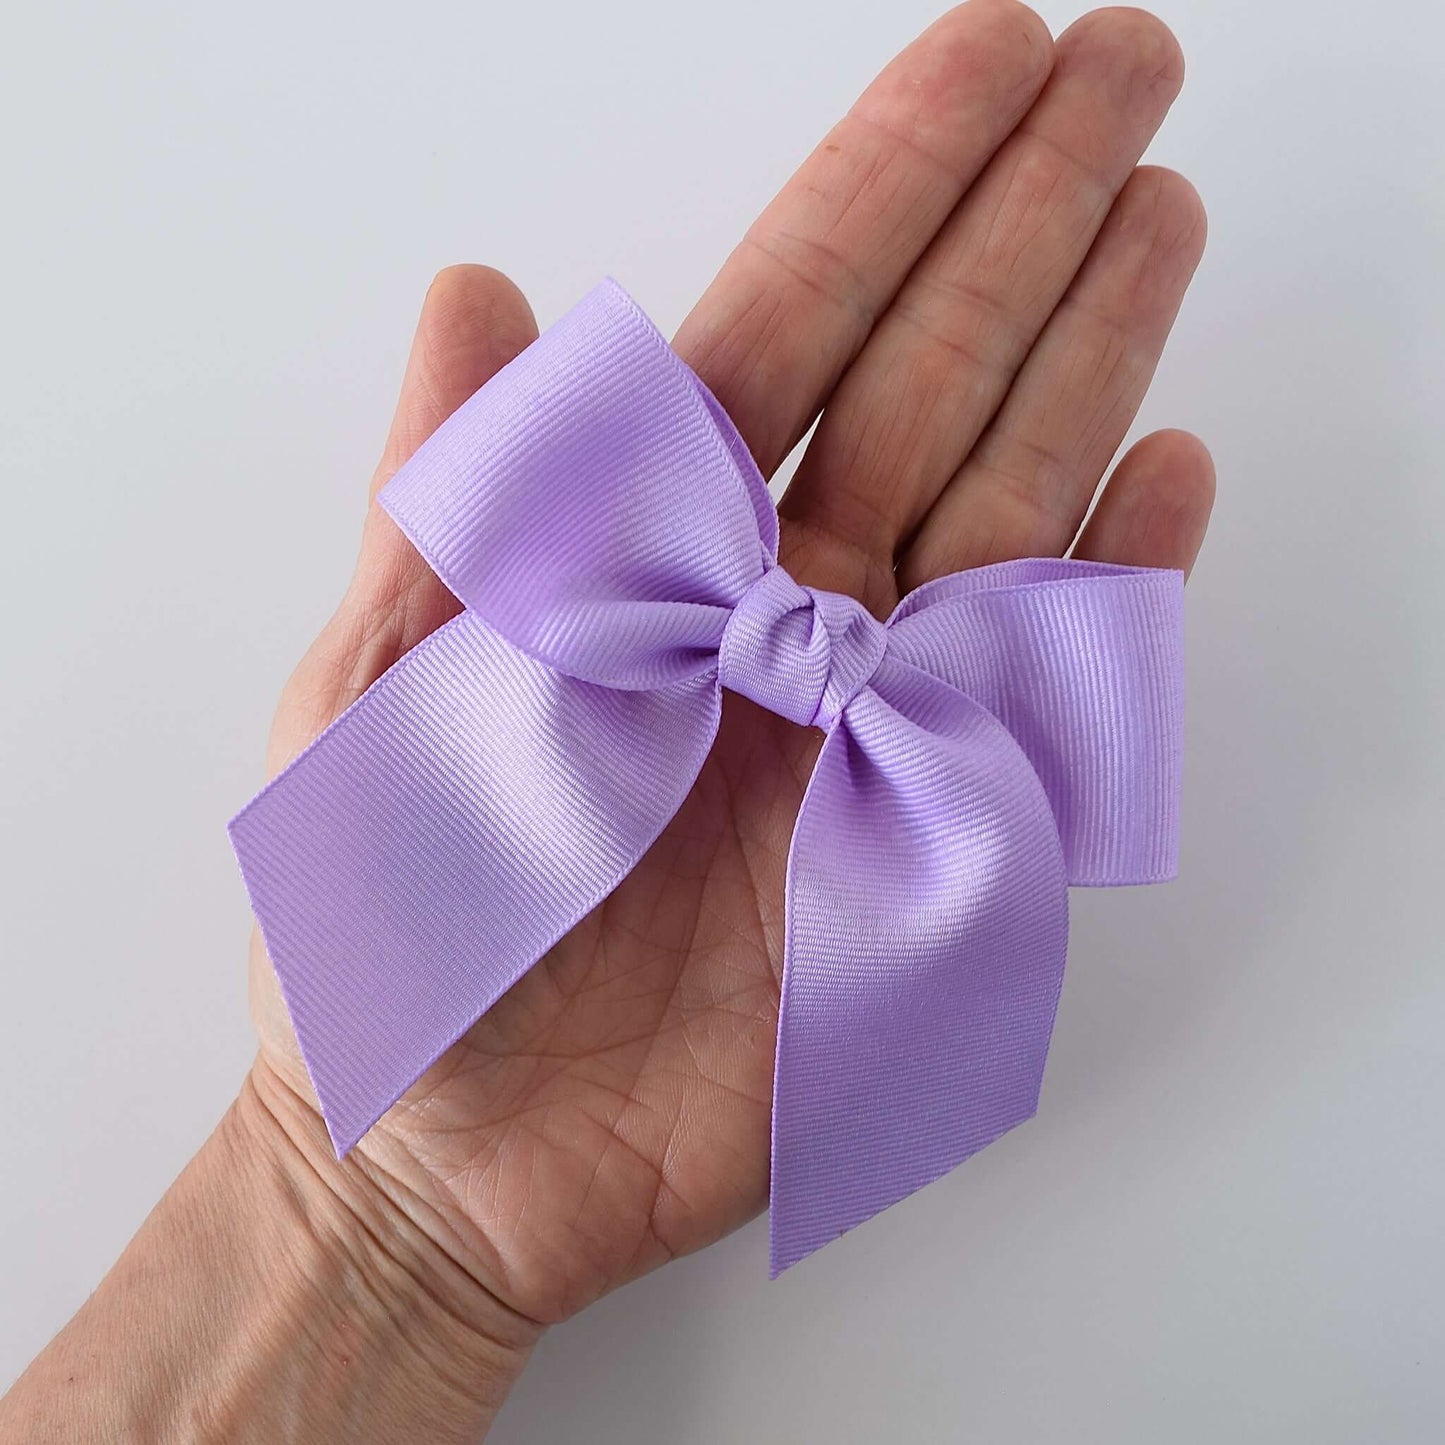 Hand holding pastel lavender 4 inch grosgrain sailor bow with alligator clip - perfect hair accessory for little girls.